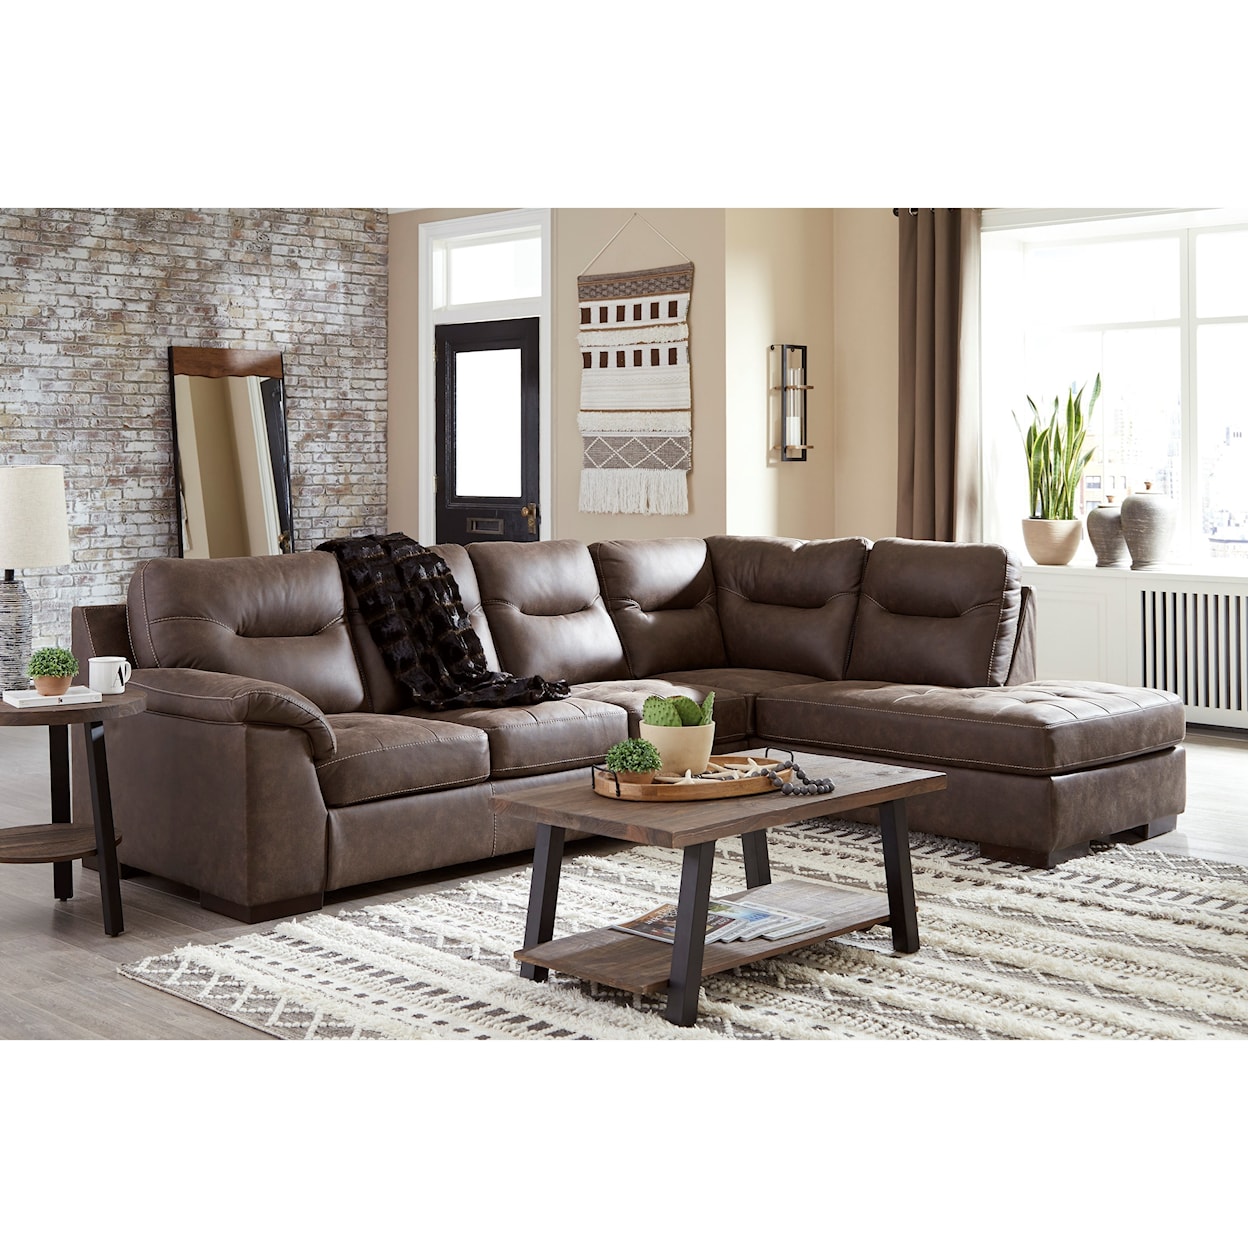 Benchcraft Maderla 2-Piece Sectional with Chaise